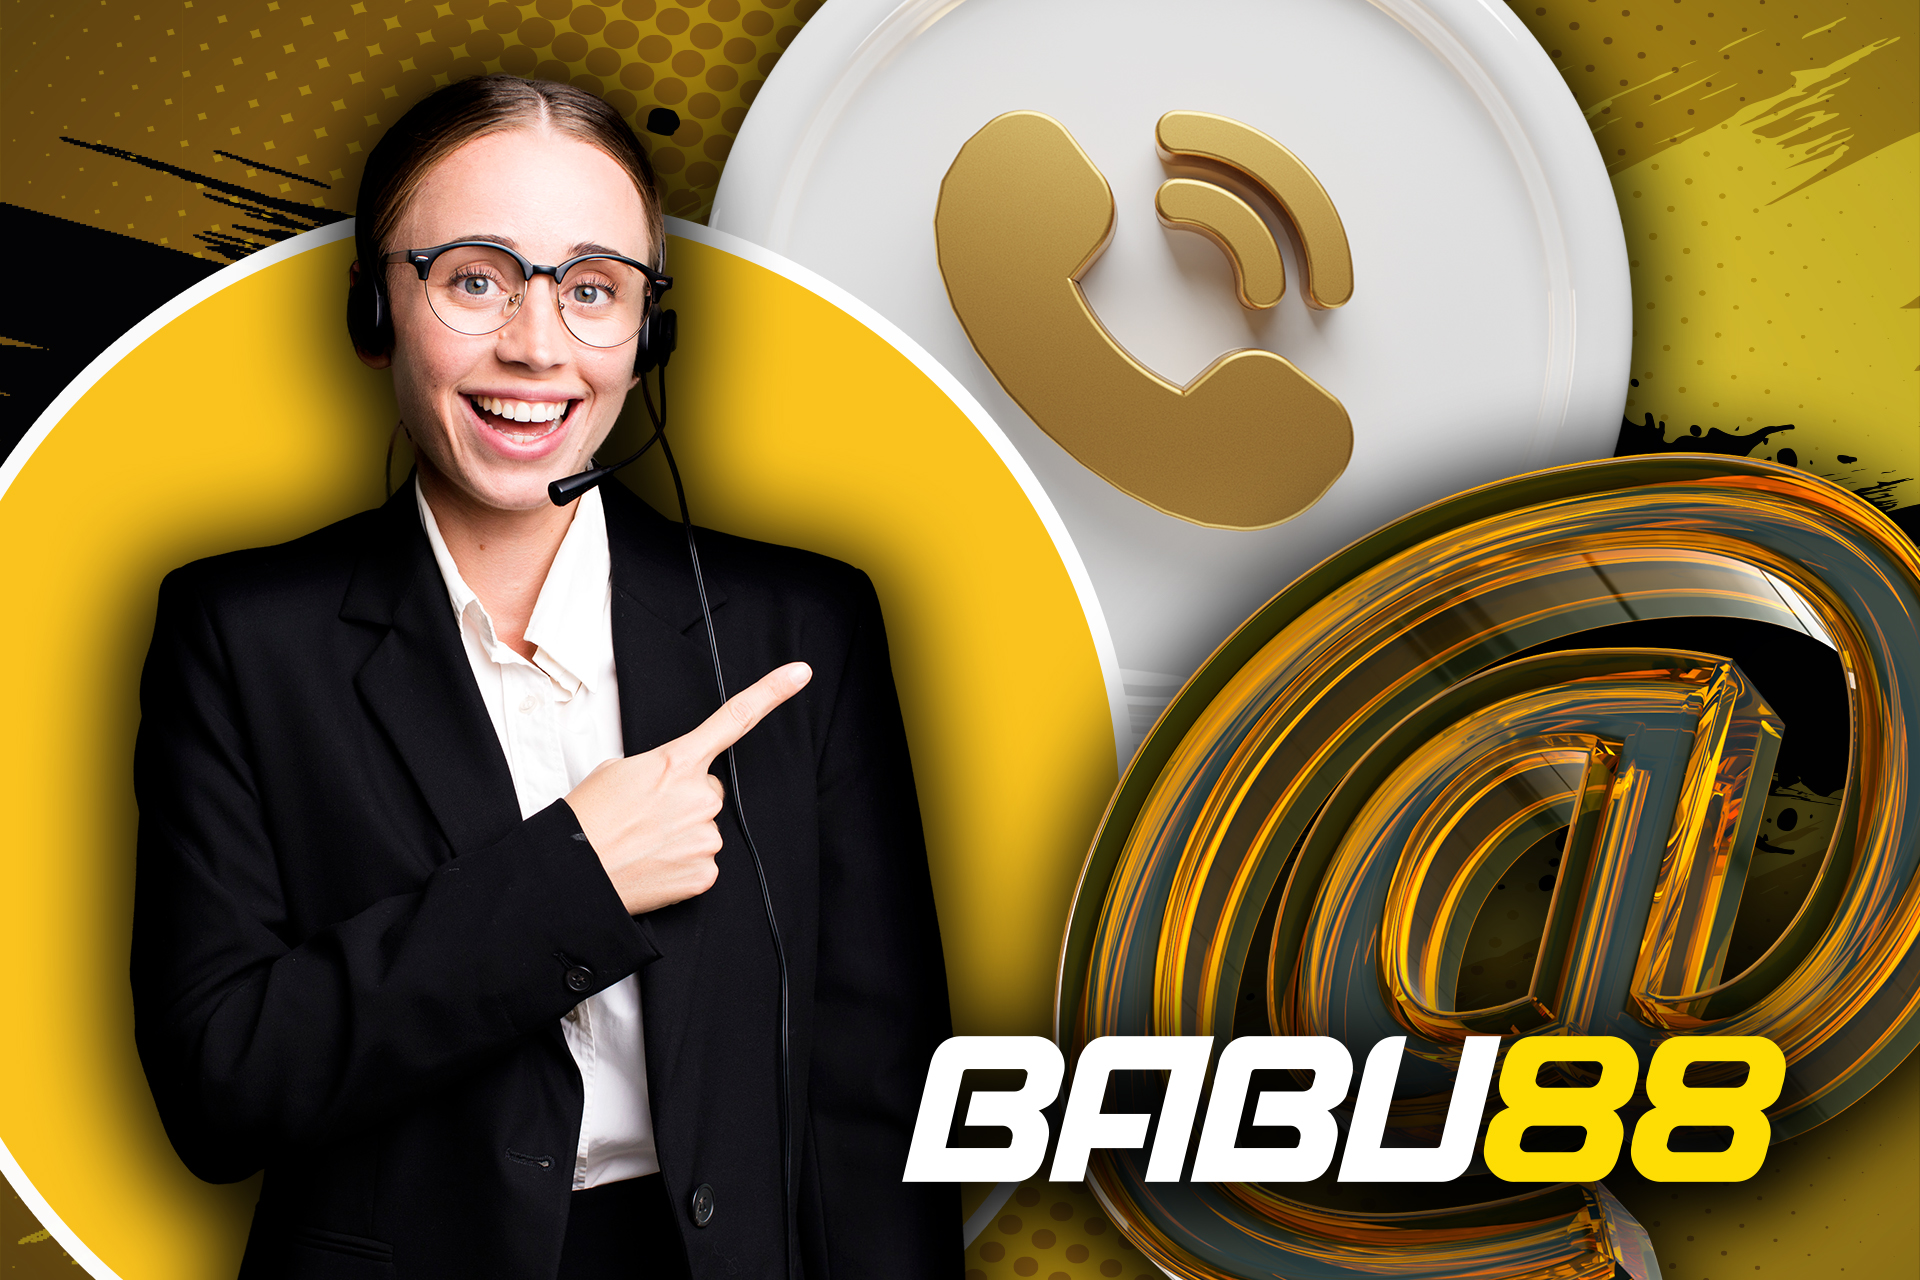 If you have any questions about the referral program, contact the Babu88 support team.